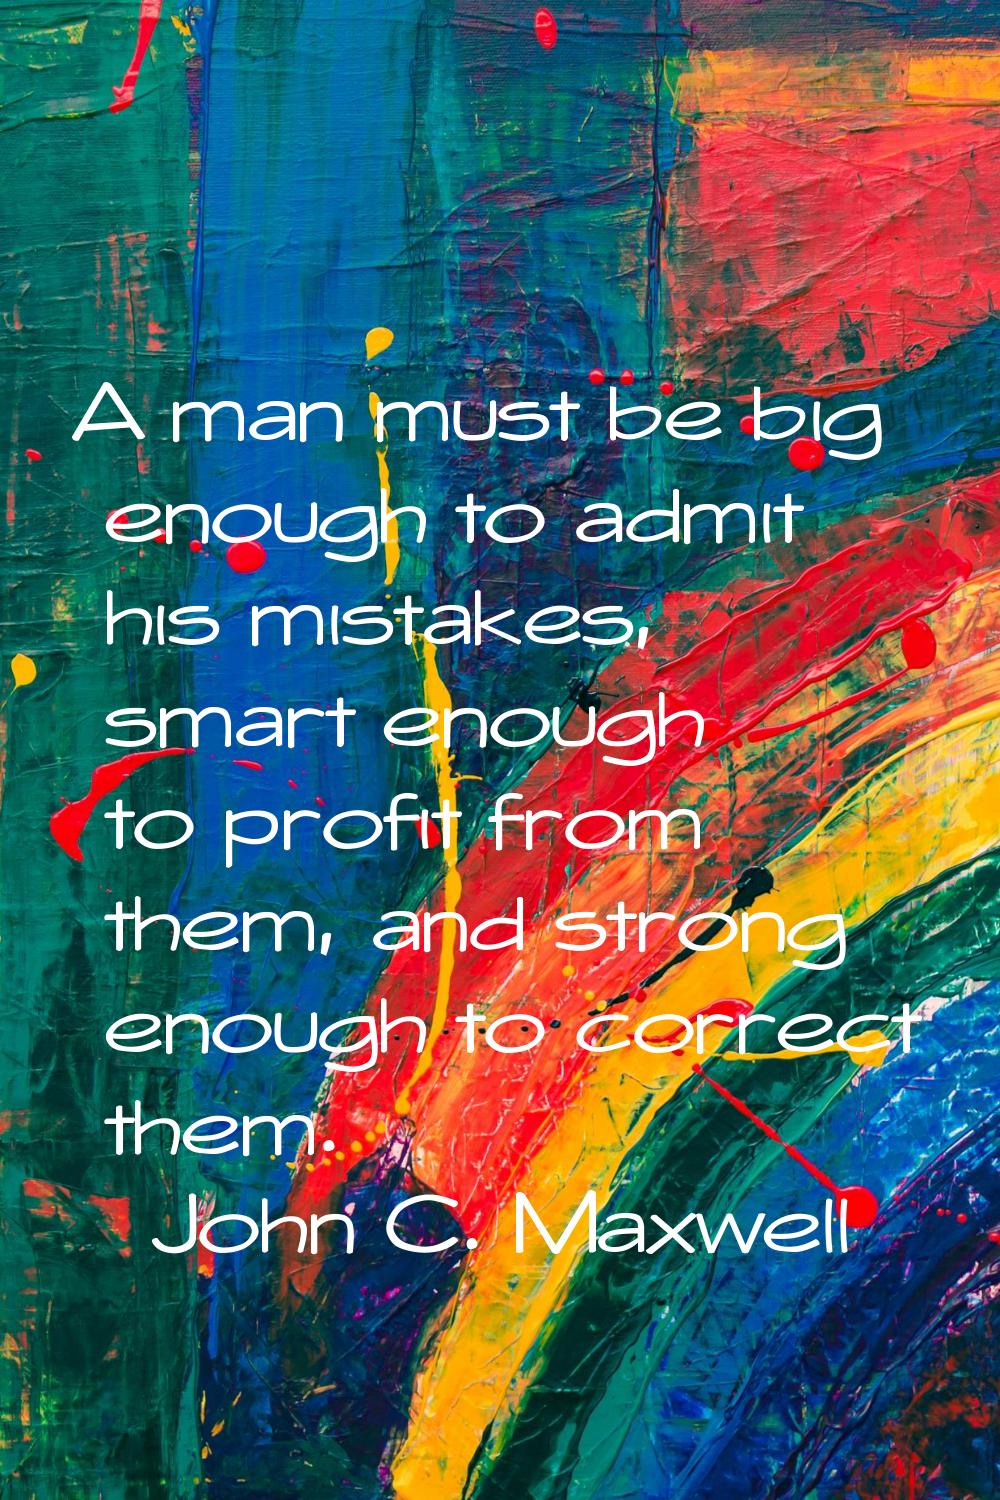 A man must be big enough to admit his mistakes, smart enough to profit from them, and strong enough